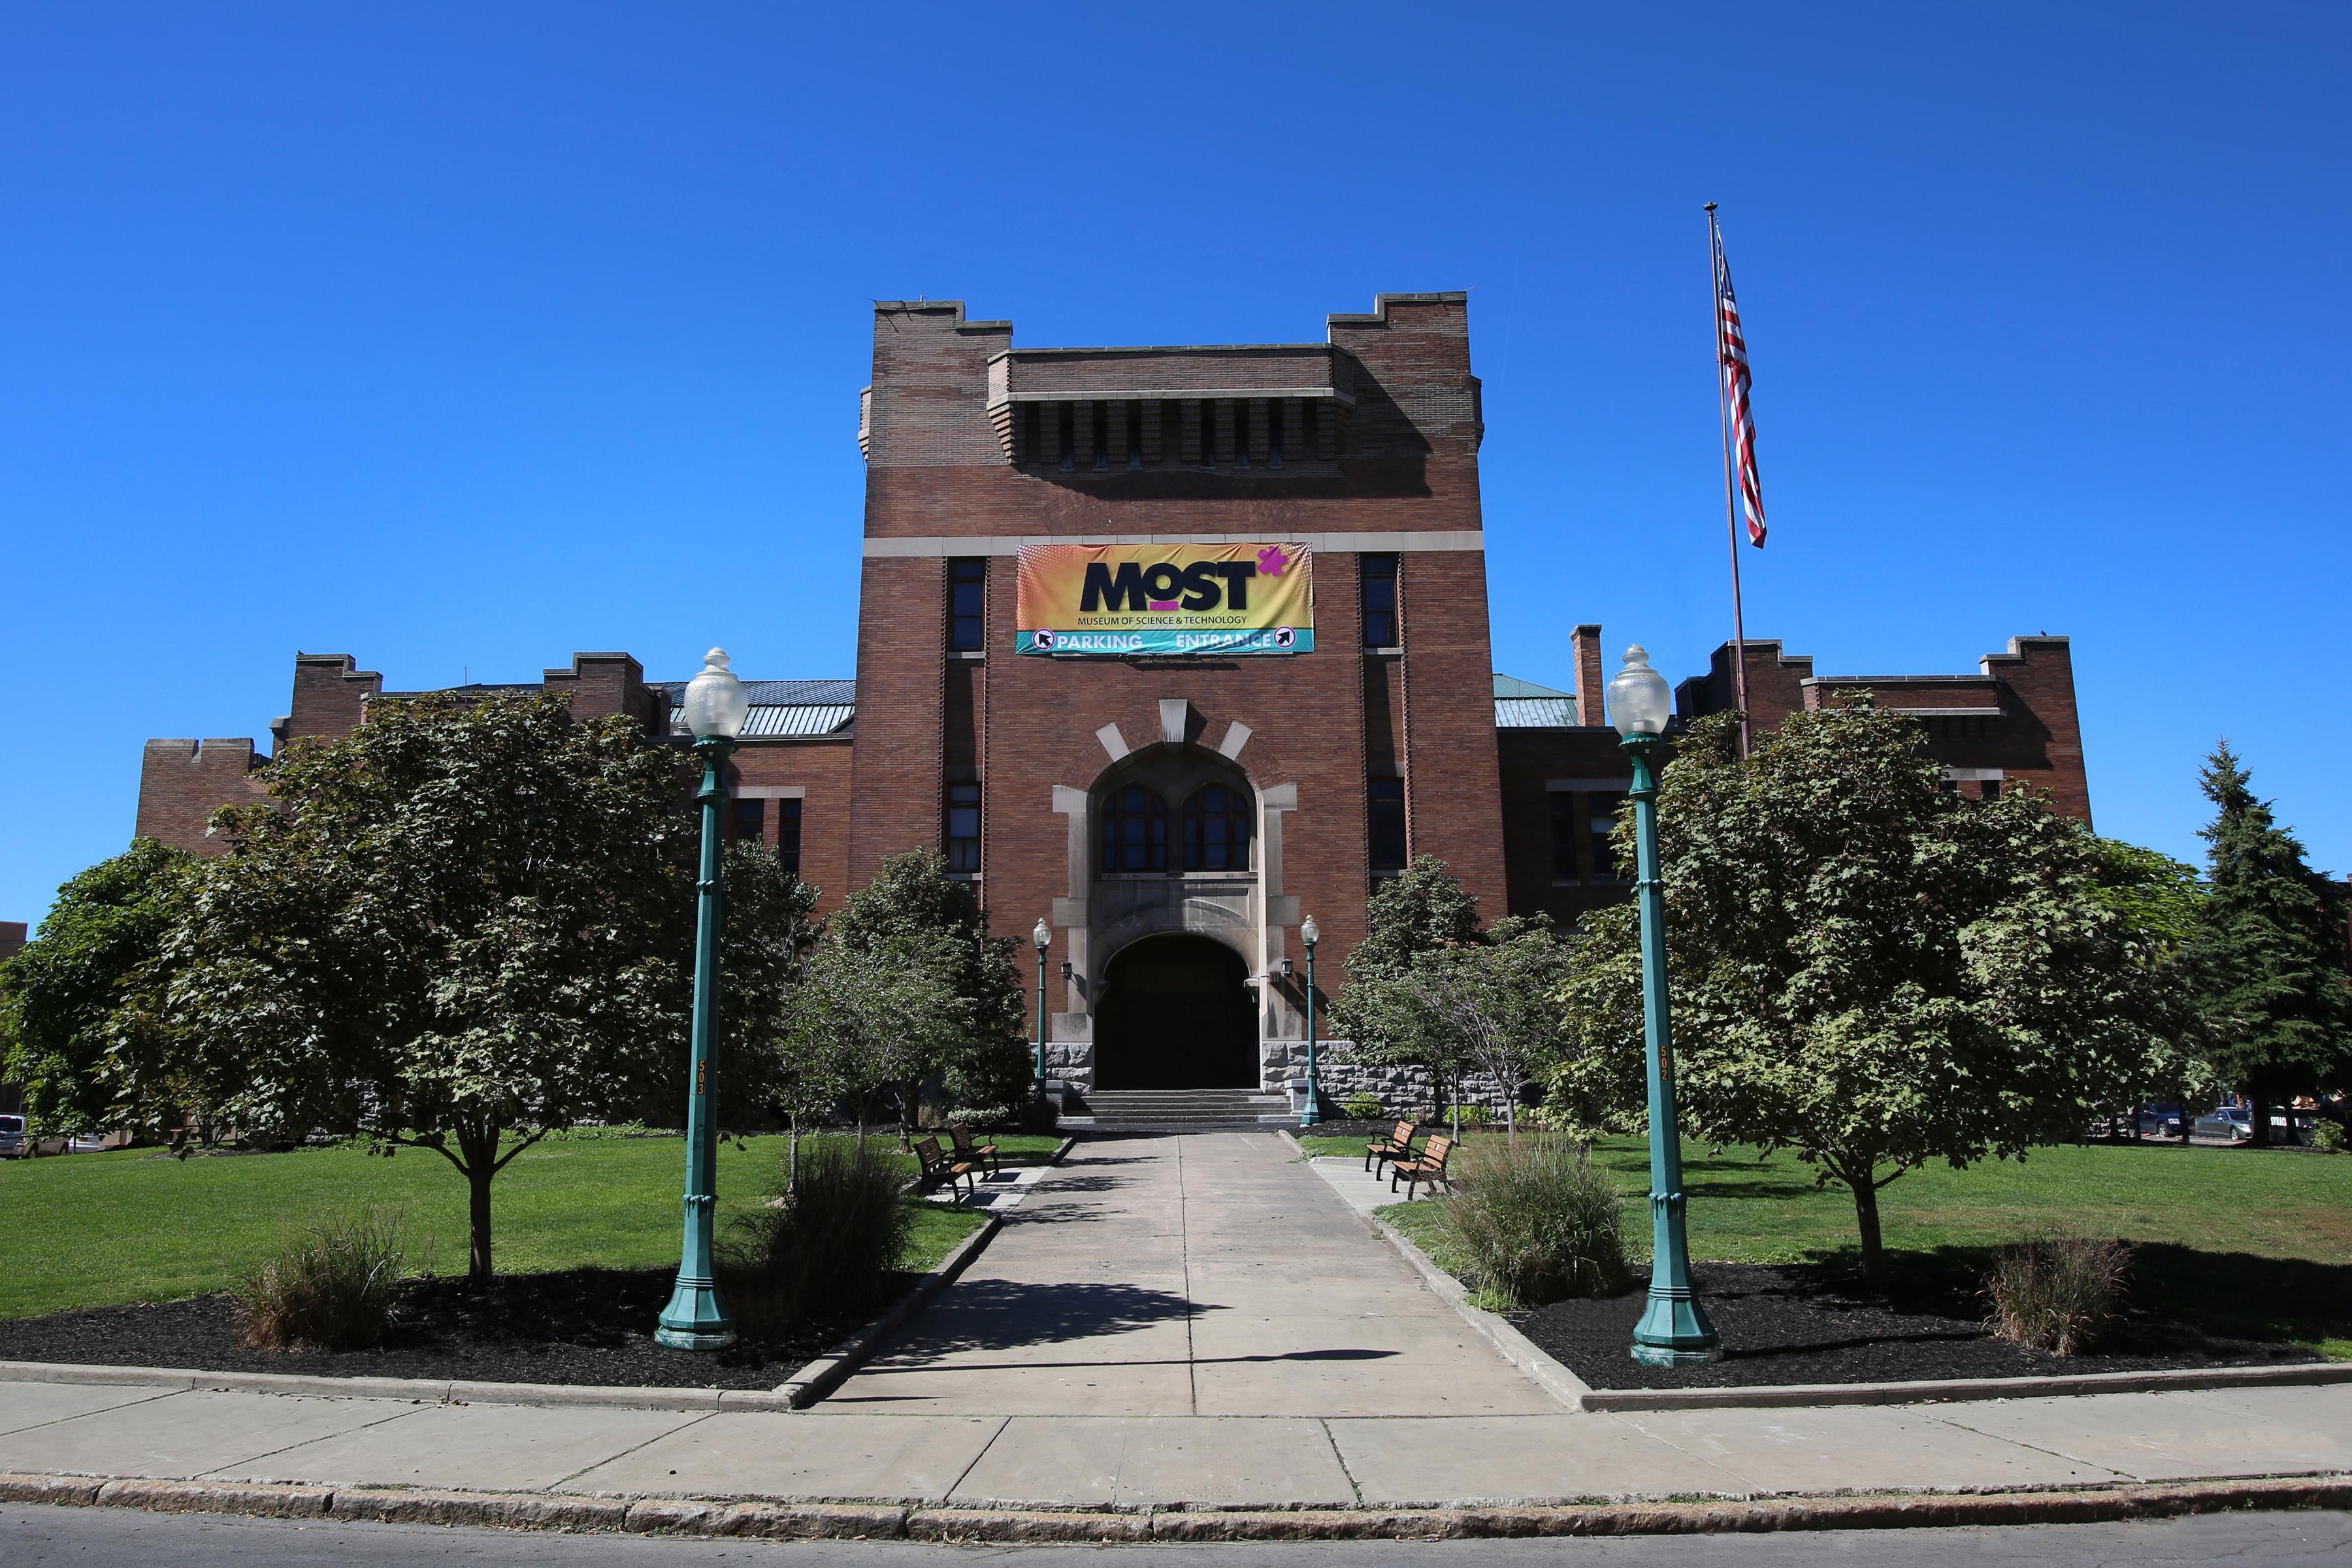 M.O.S.T Museum of Science Technology, located downtown.